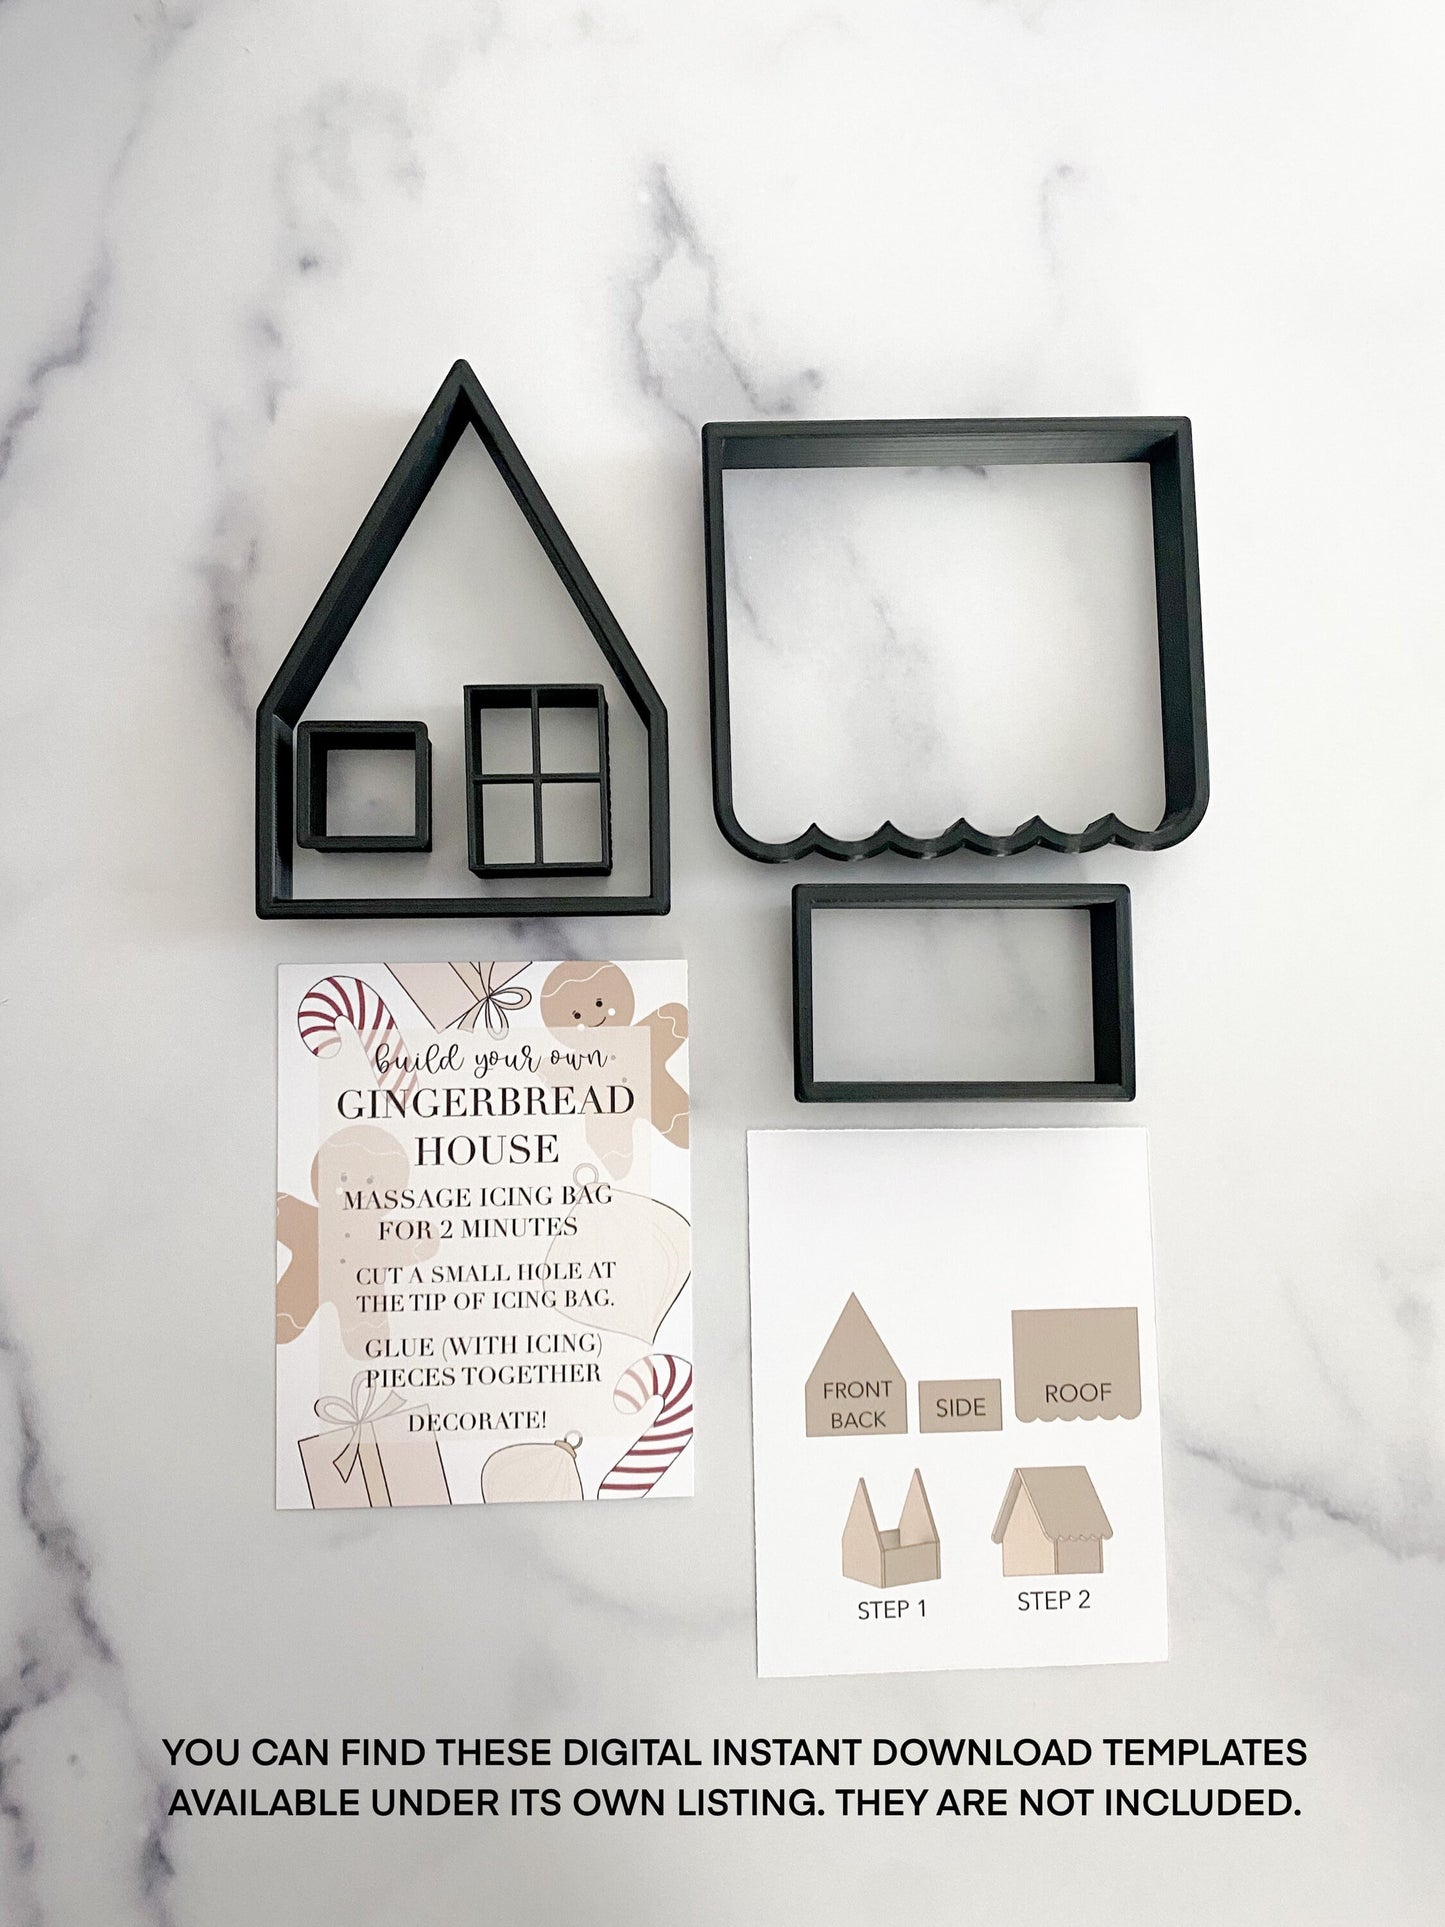 Gingerbread house / build your own house cookie cutter